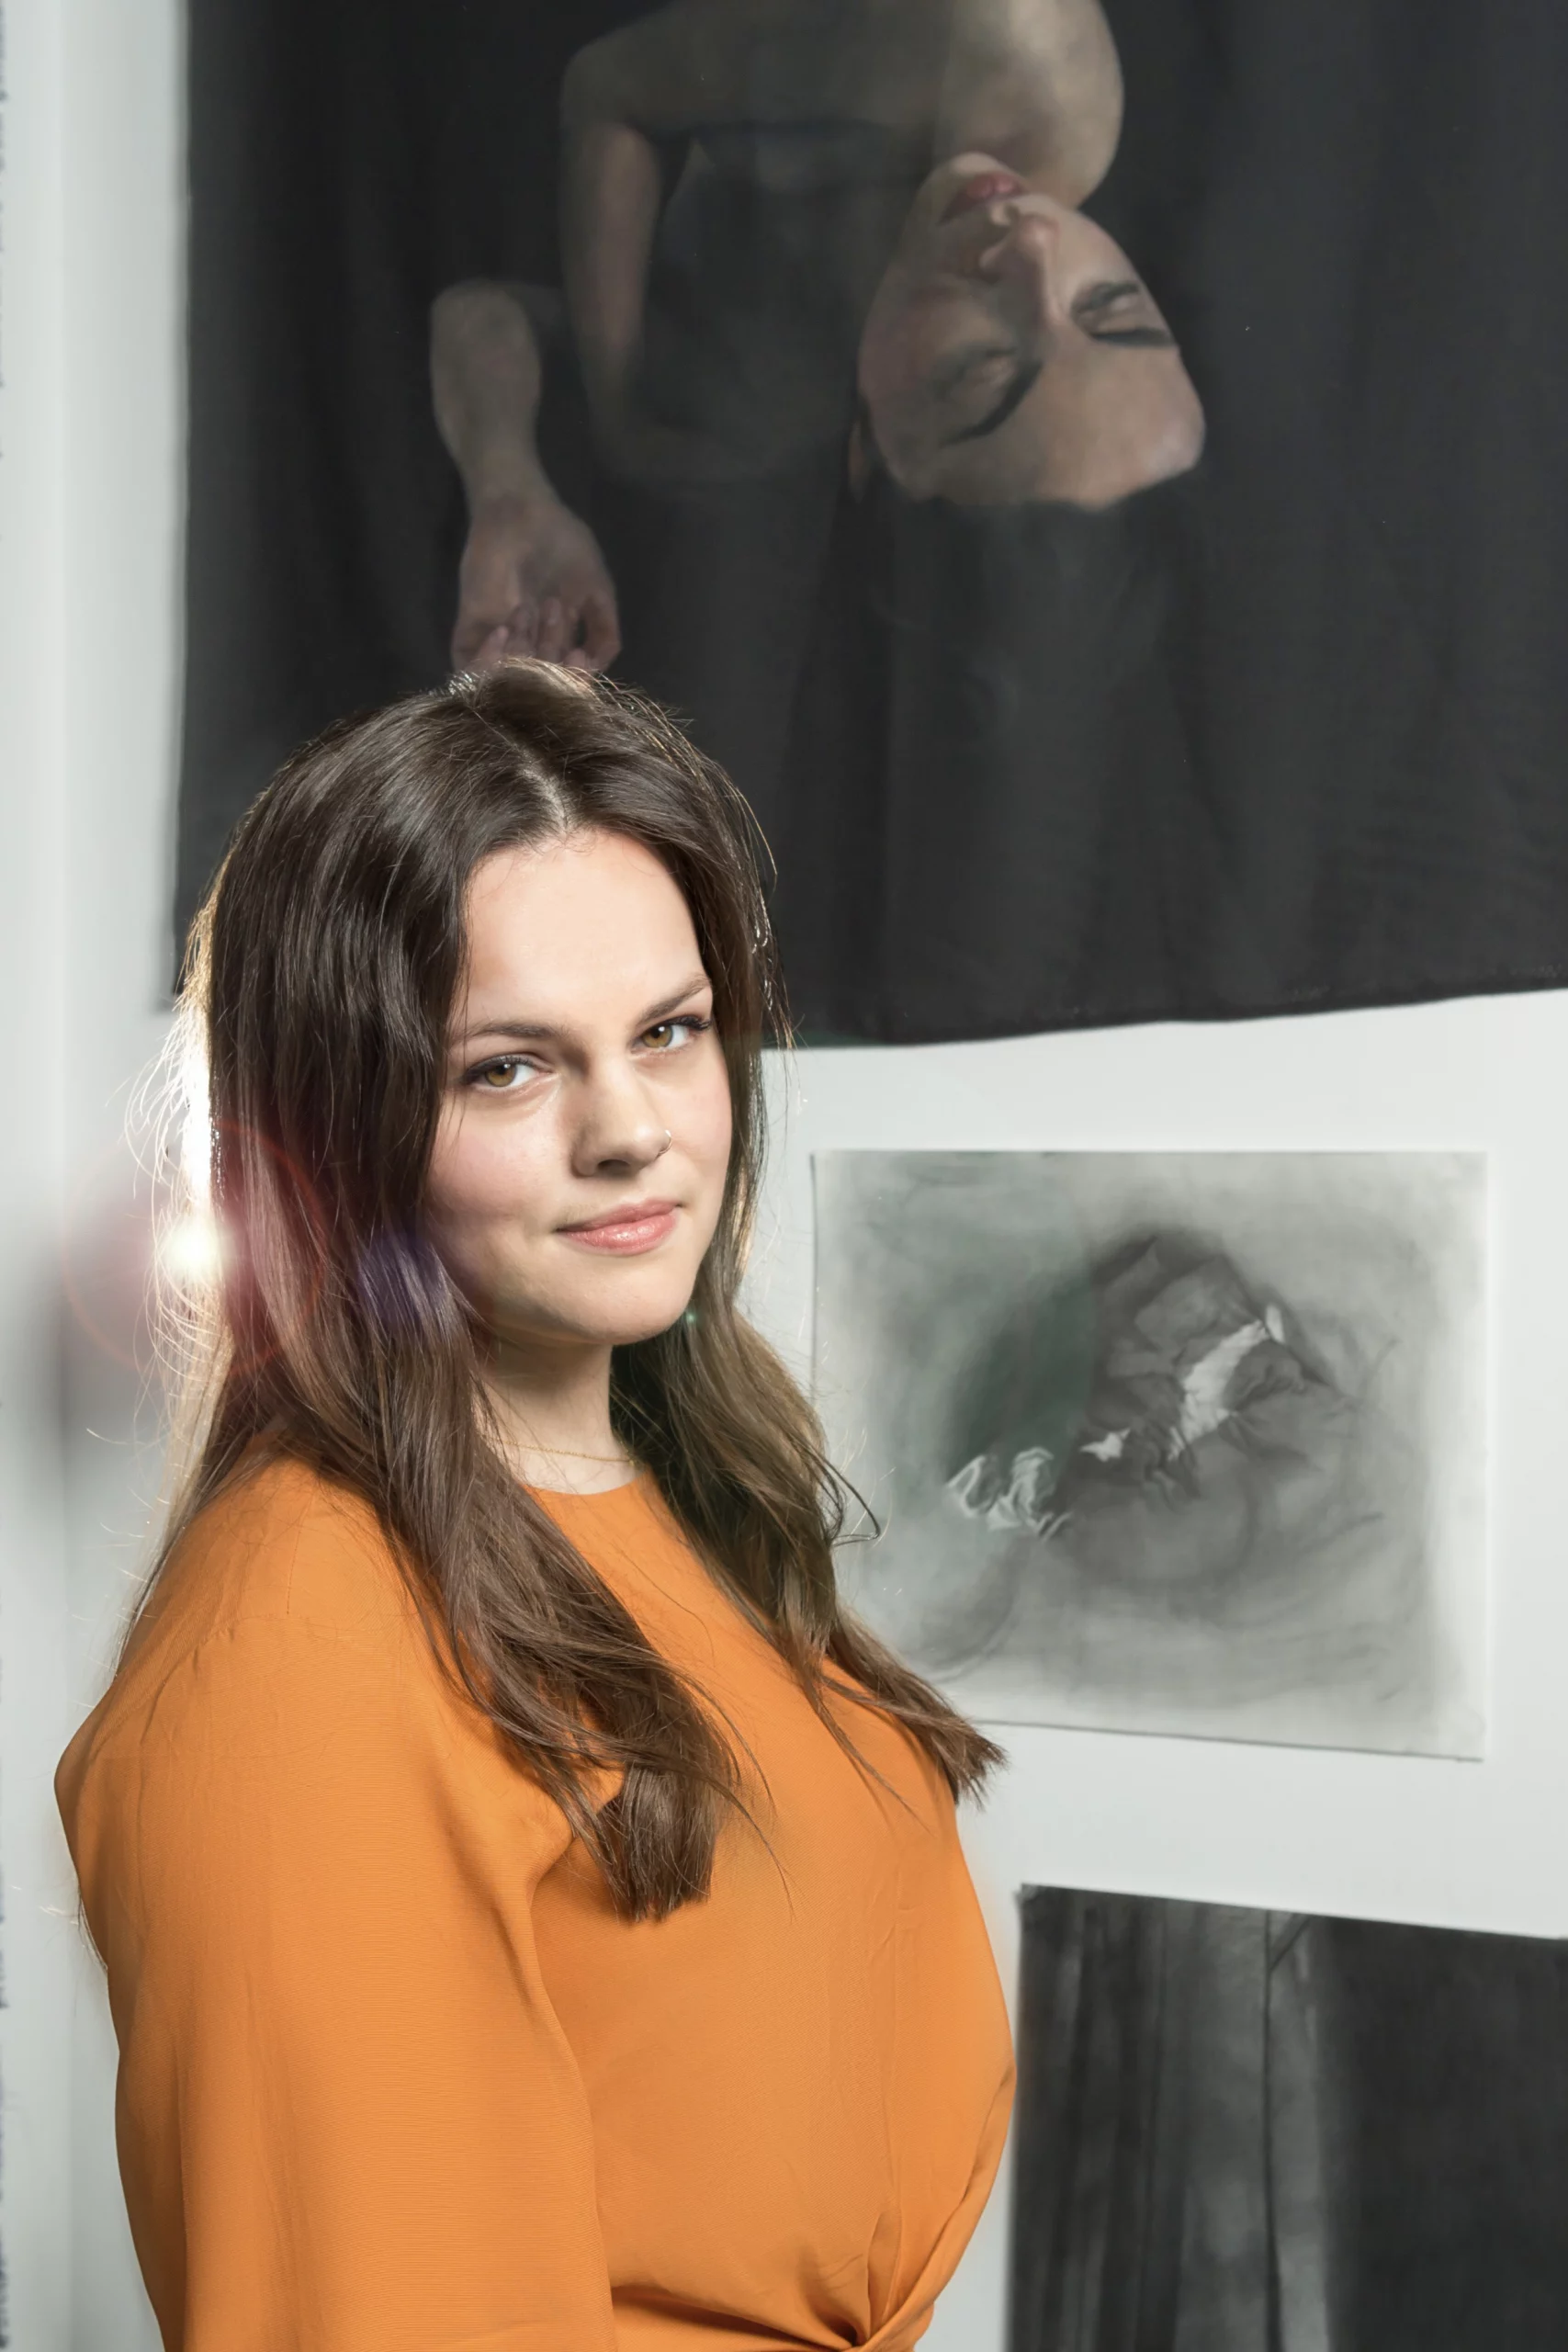 Sian Smith Portrait artist of the year series